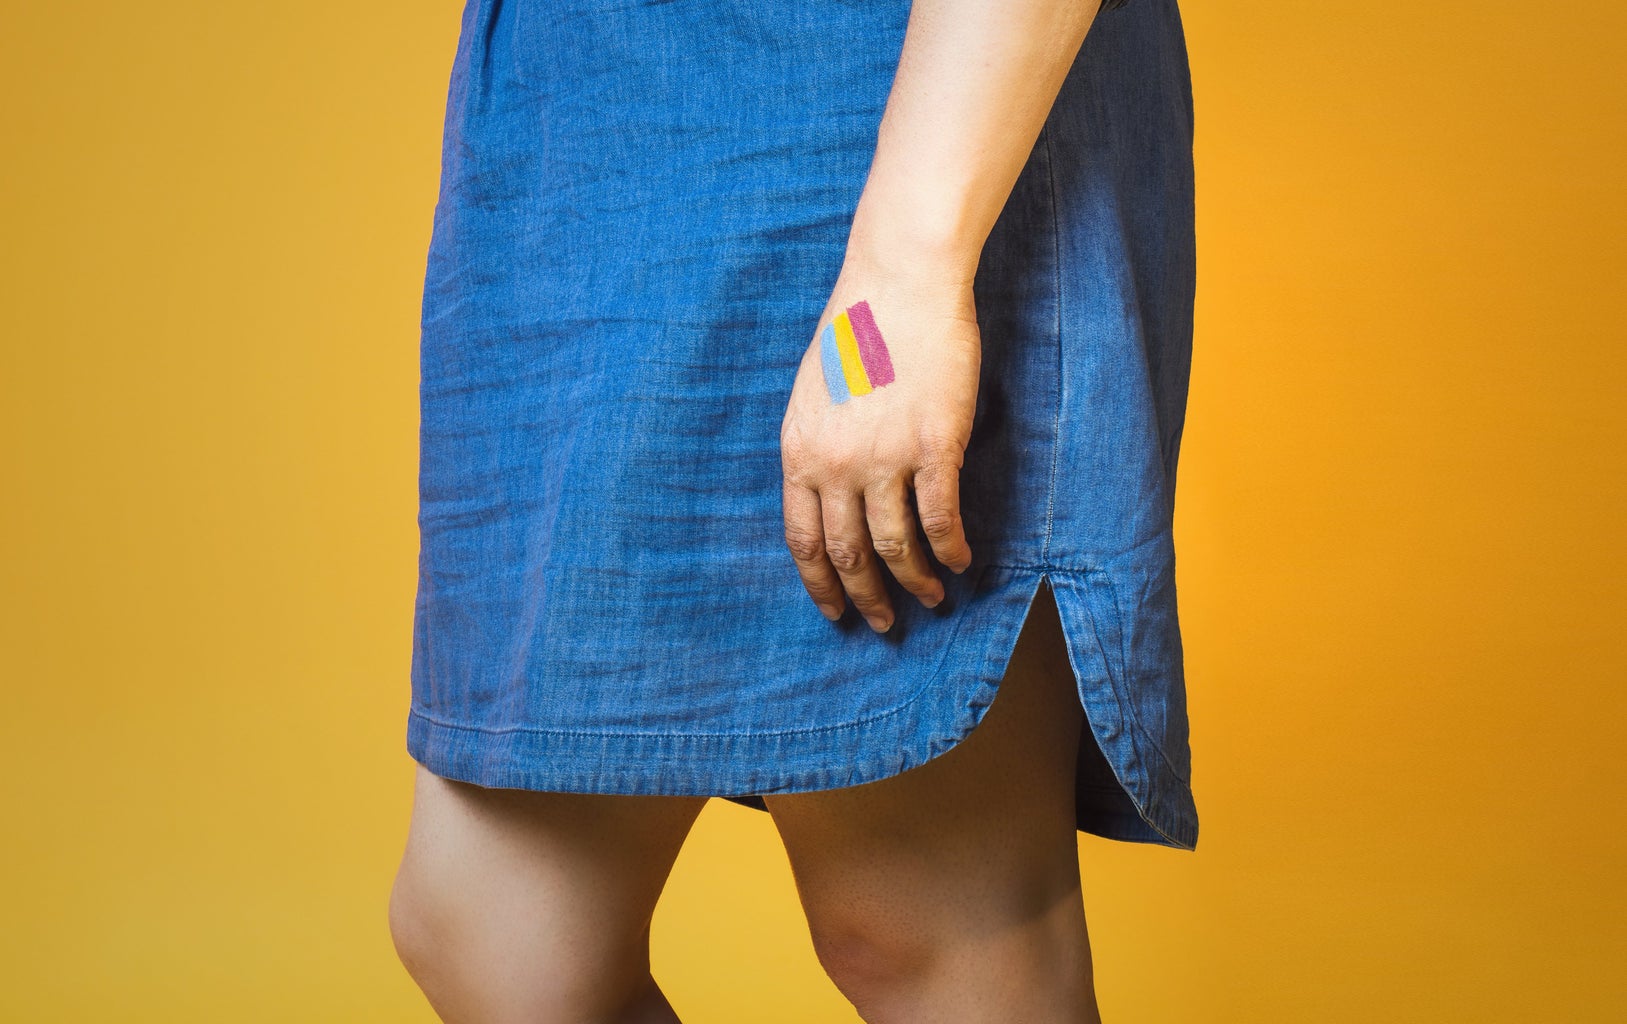 Close up of person in a dress from the waste down, with the pansexual pride flag painted on their hand.